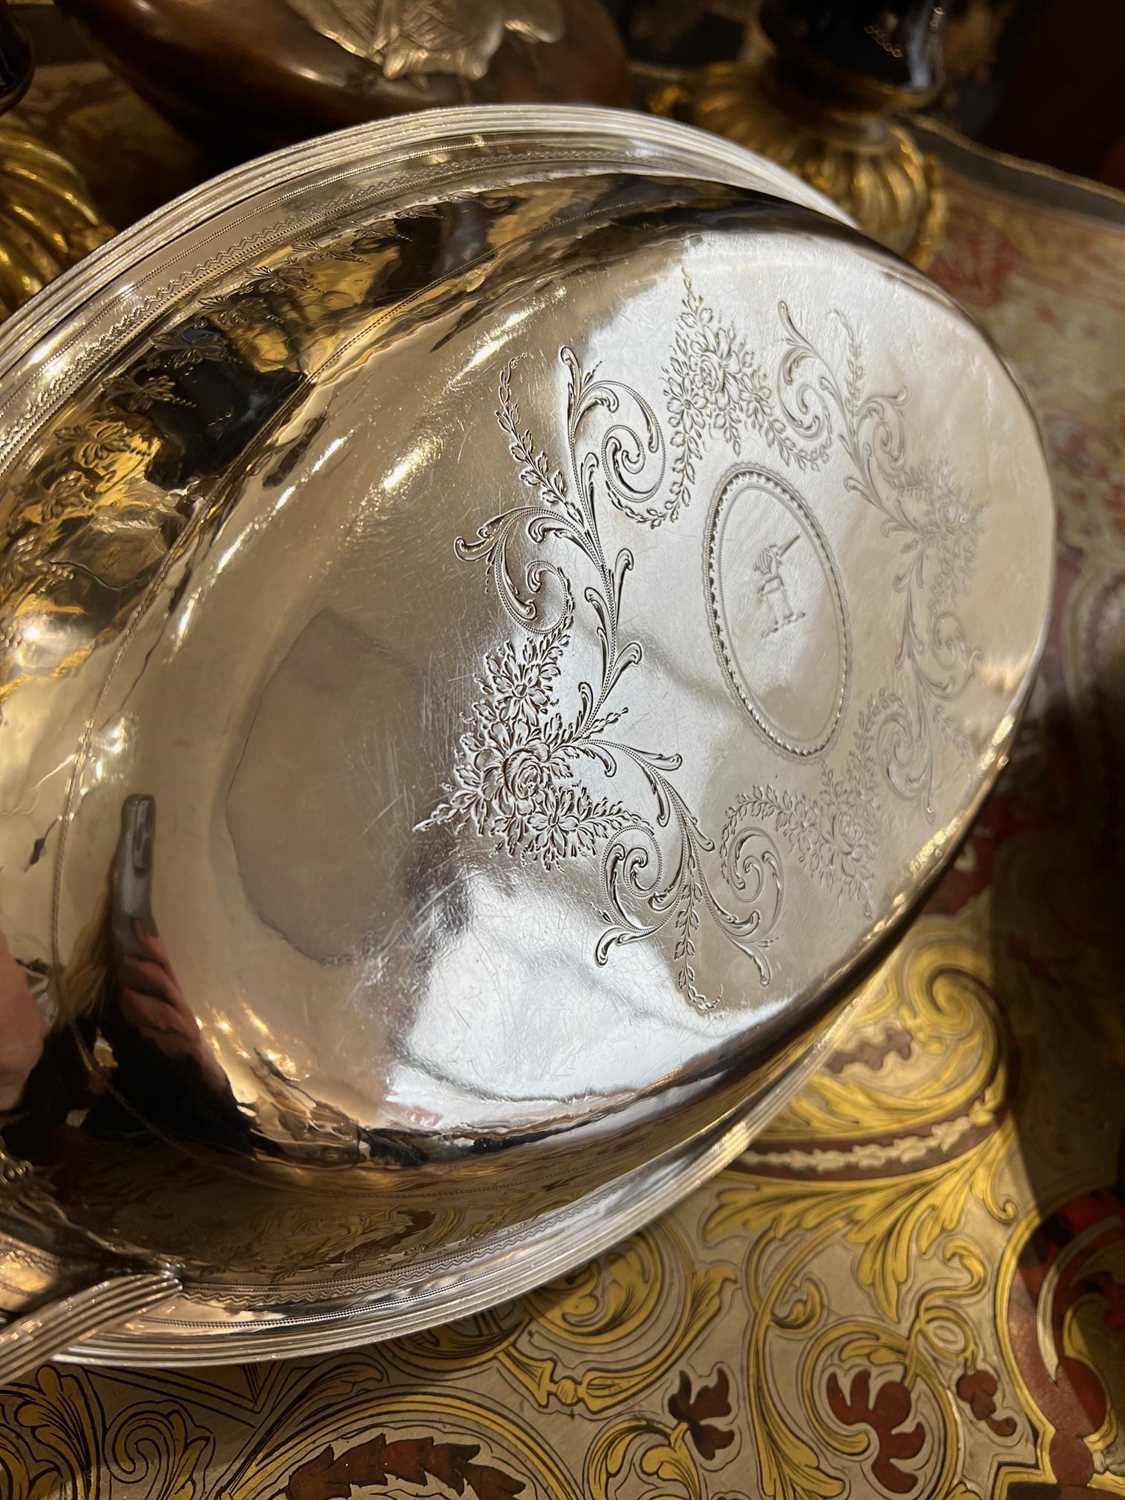 A PAIR OF 18TH CENTURY STERLING SILVER HASH DISHES BY PETER & ANN BATEMAN, 1798 - Image 8 of 10